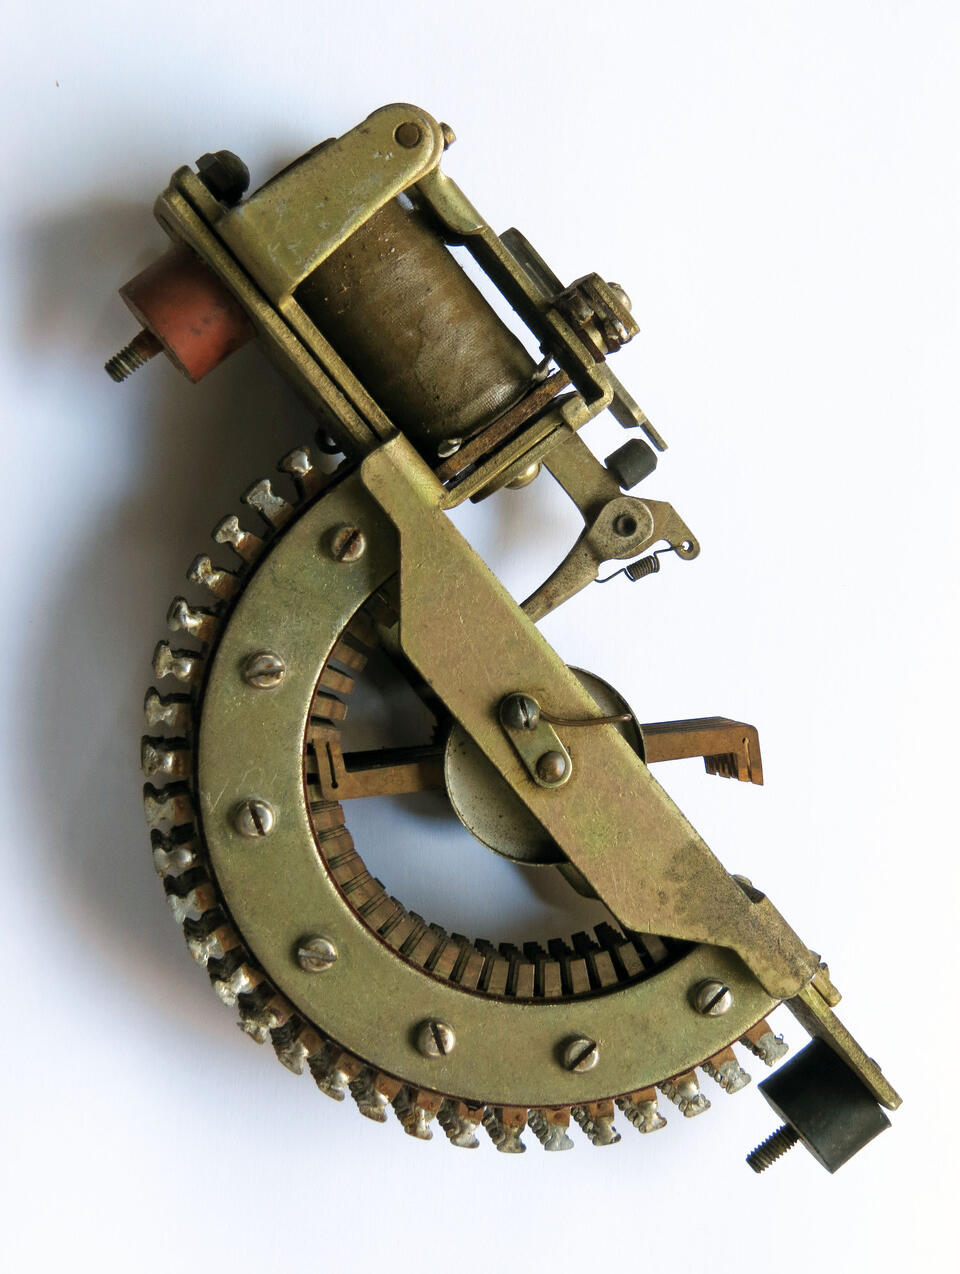 Color photograph: Vintage radial stopper switch, a bronze-colored machine part against a plain white background.